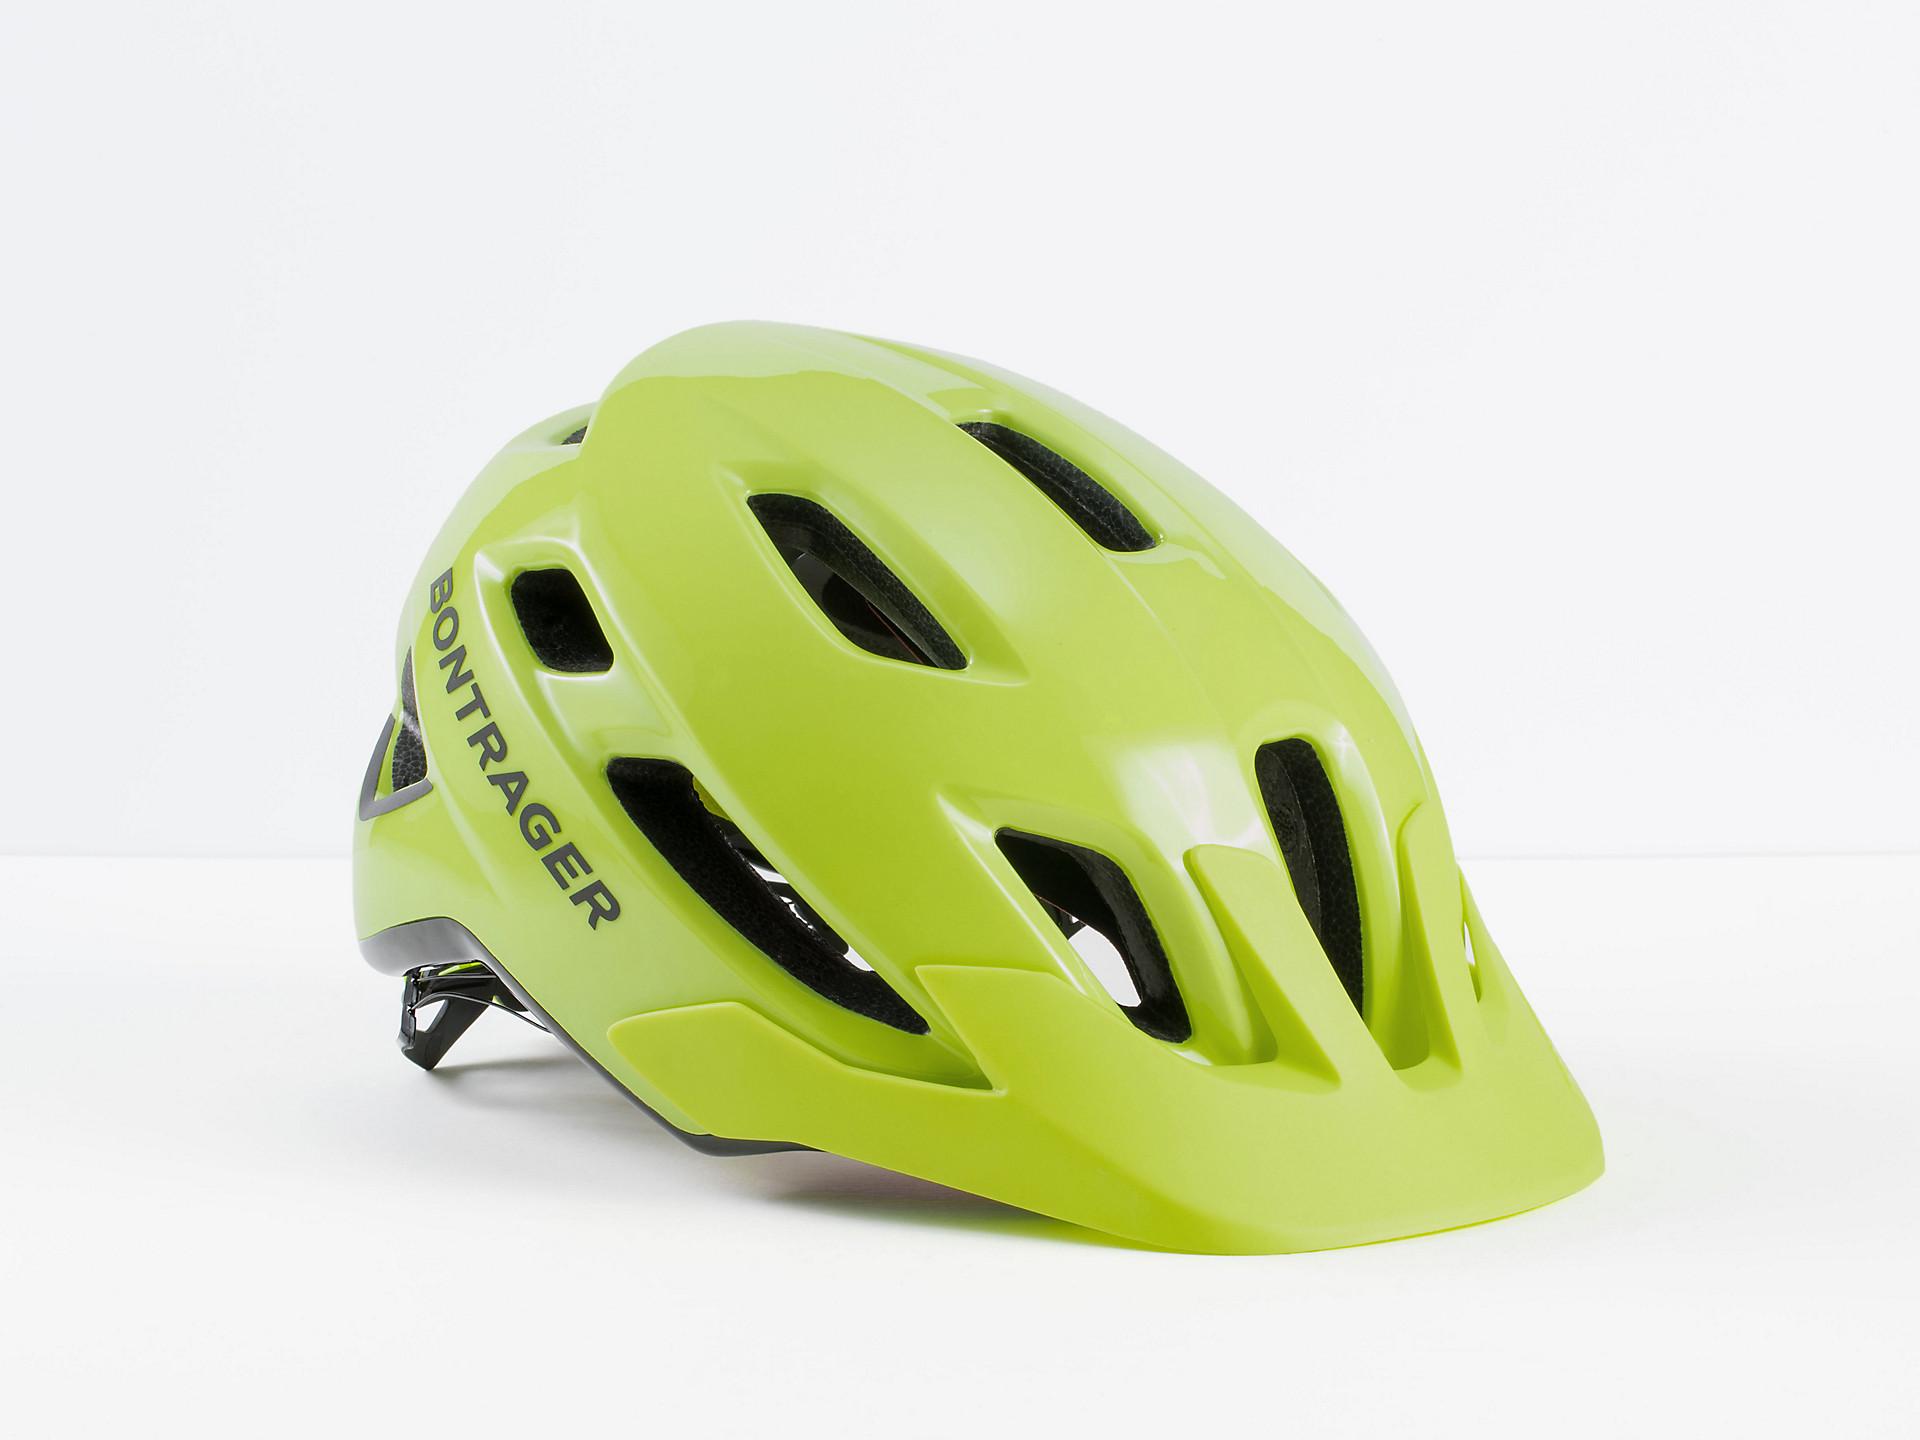 <a href="https://cycles-clement.be/product/casque-bont-quantum-mips-s-radioactive-yellow-l/">CASQUE BONT QUANTUM MIPS S RADIOACTIVE YELLOW L</a>